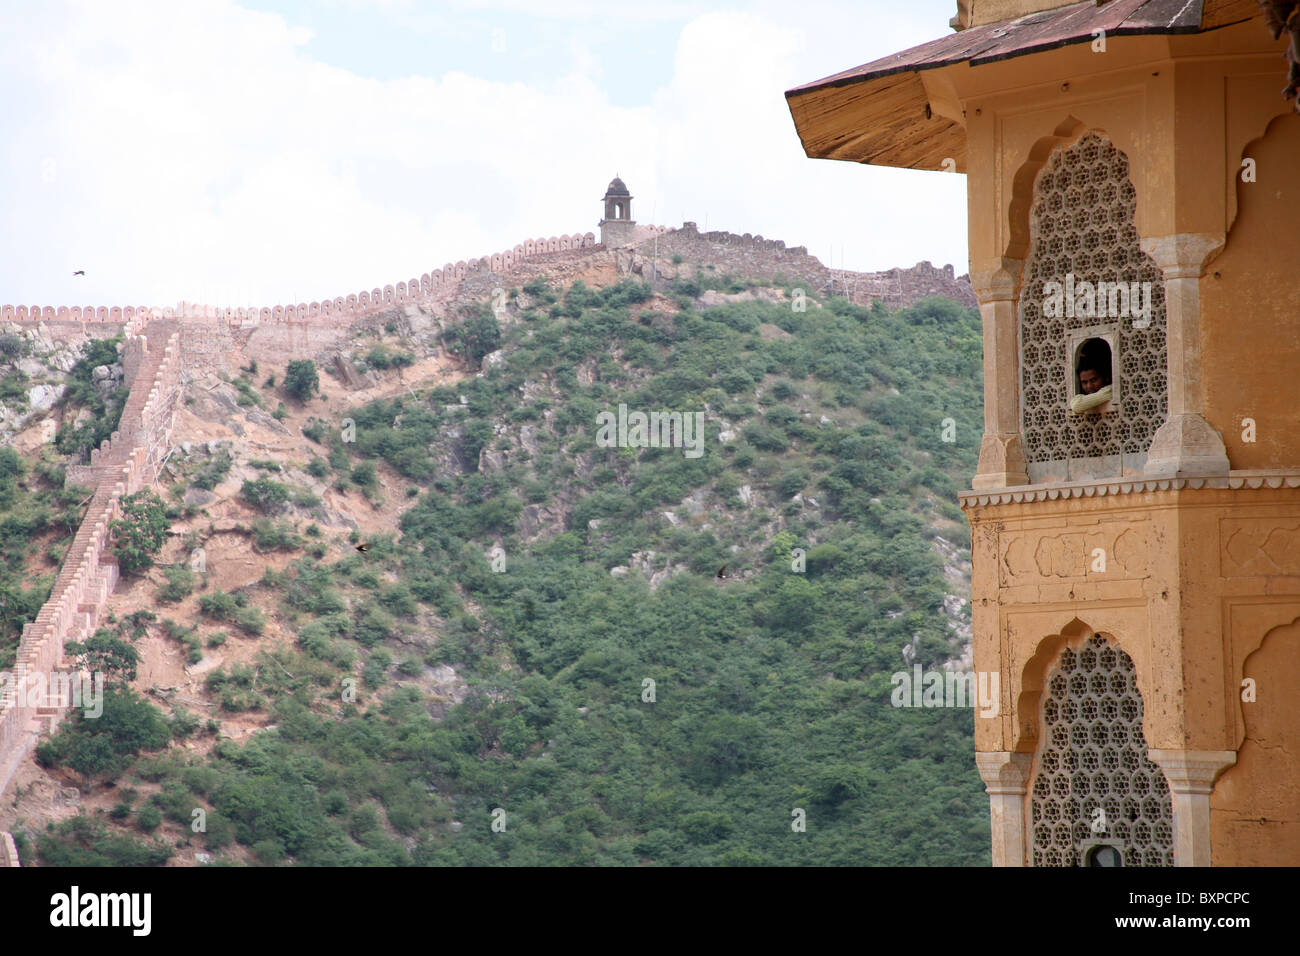 Looking out at the view from the ramparts at the Amber Fort near Jaipur, Rajasthan in India Stock Photo